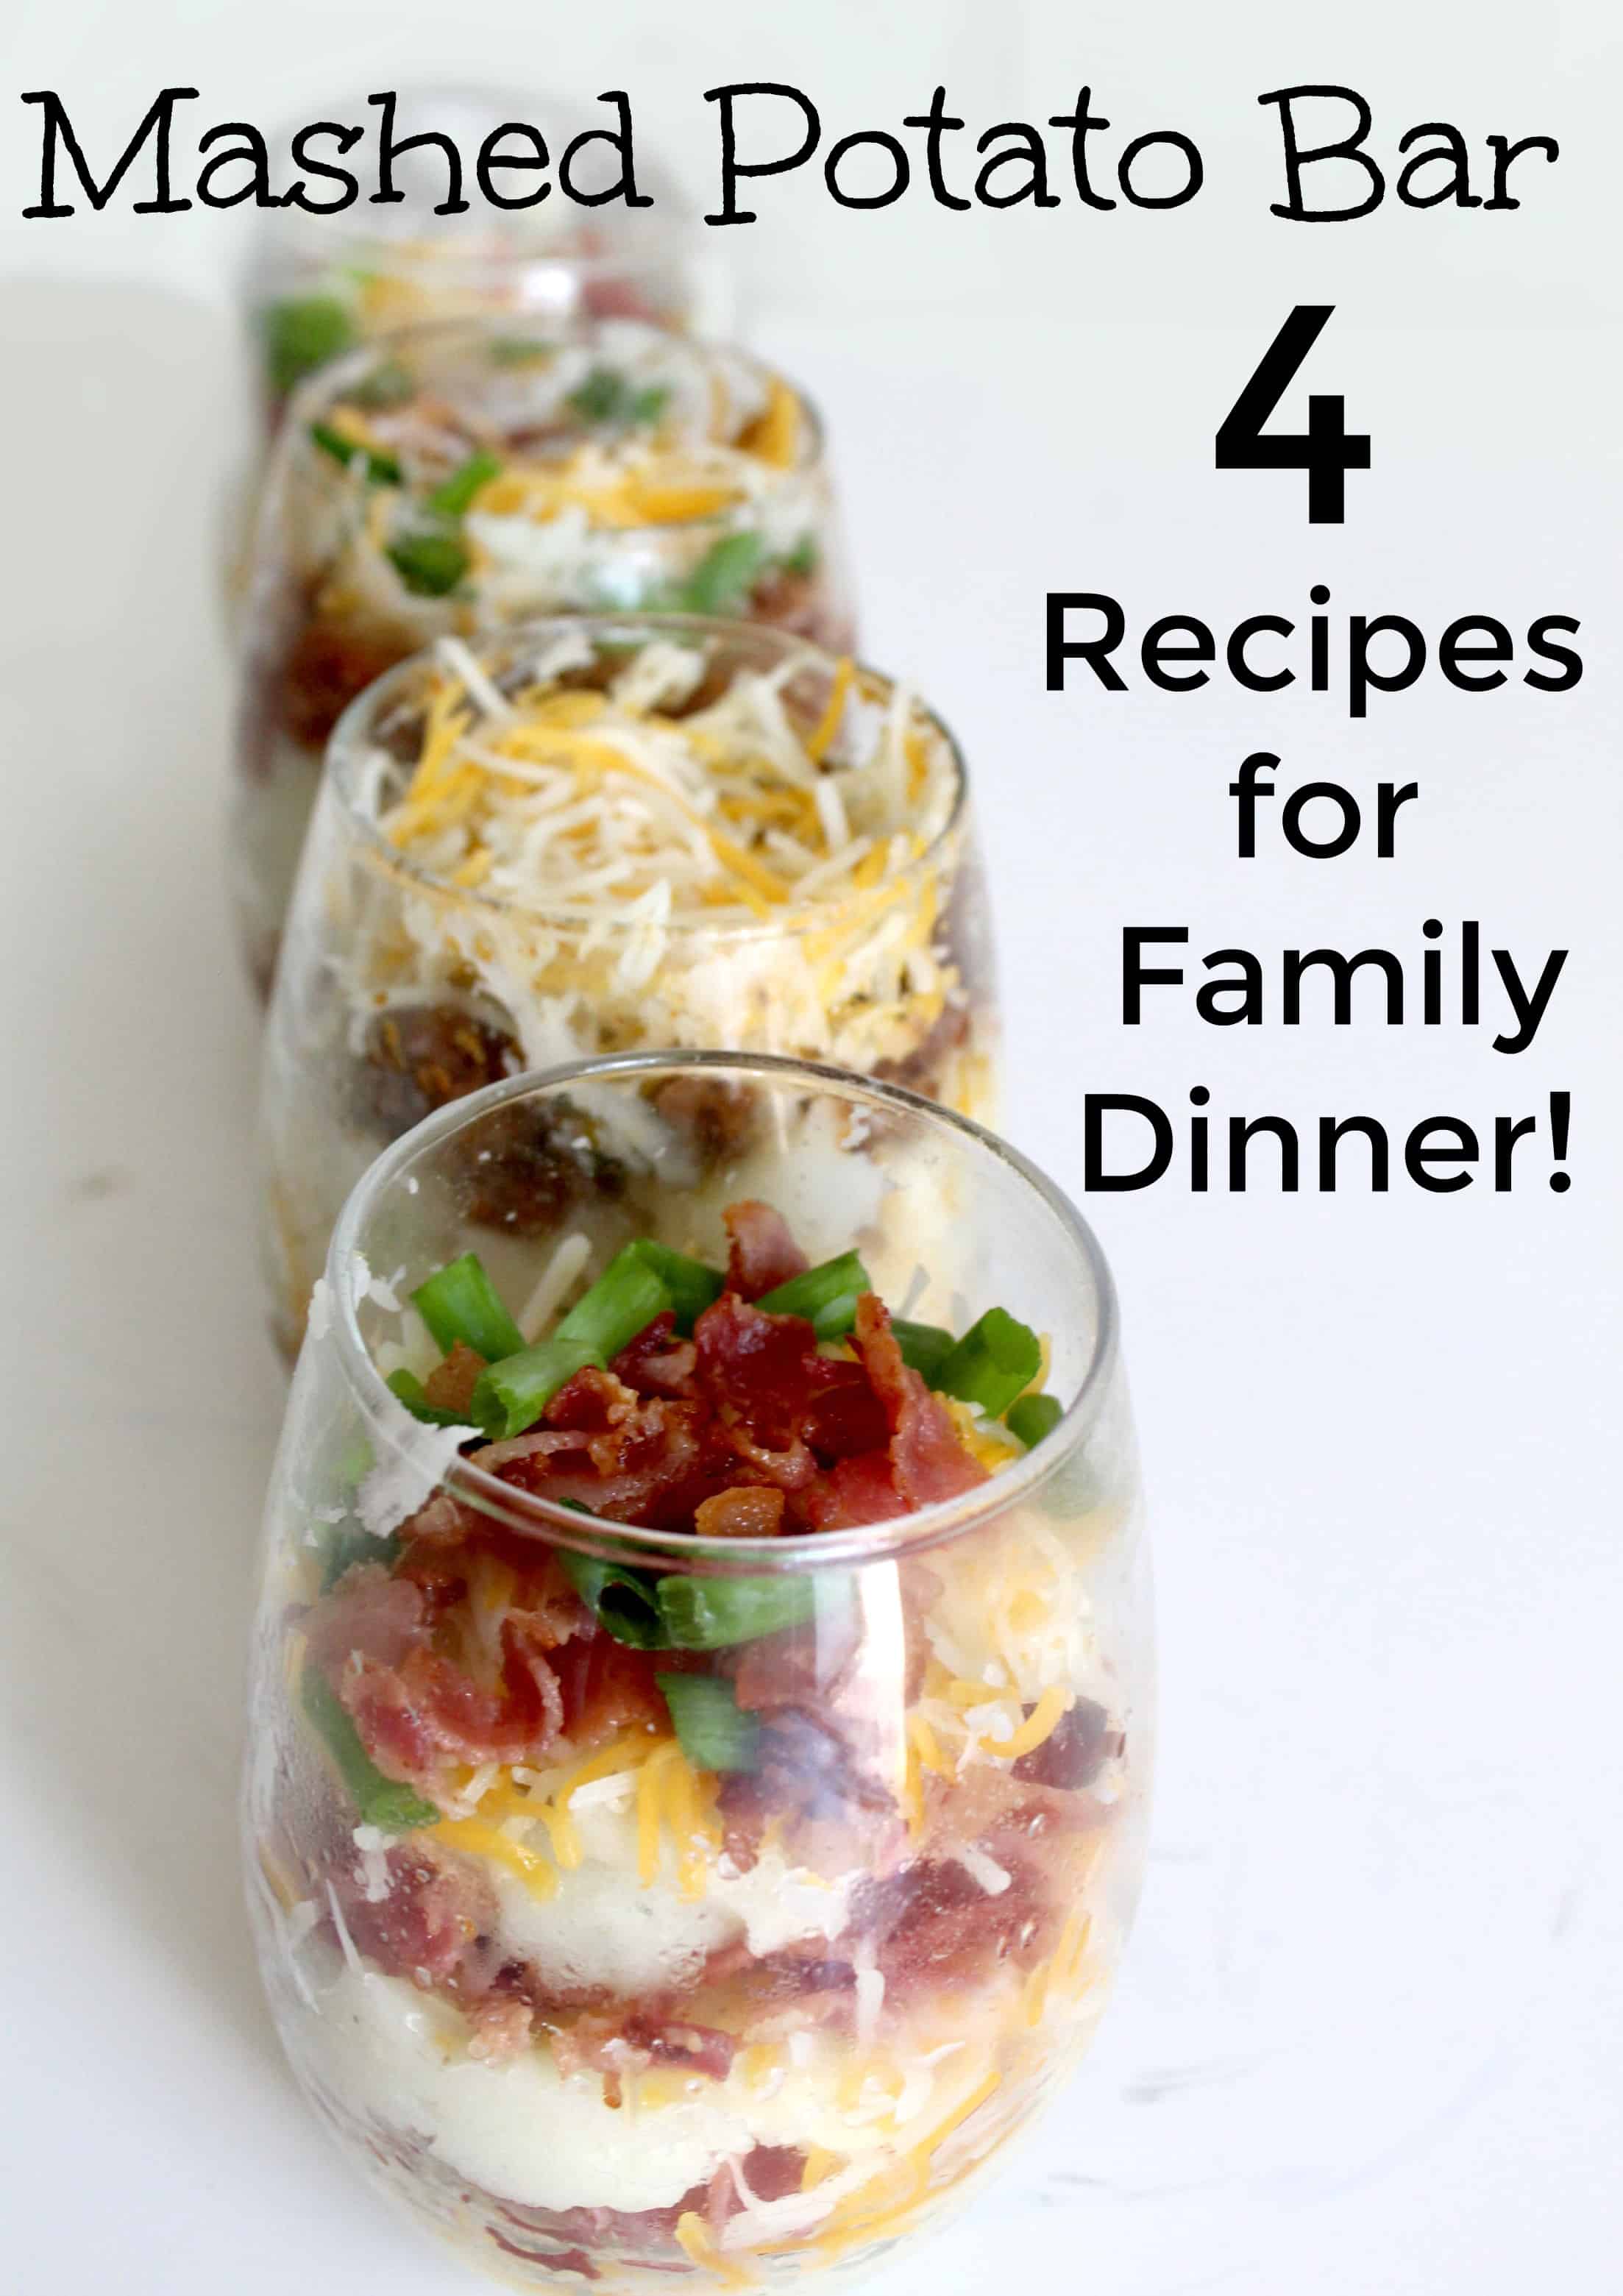 A mashed potato bar is the perfect way to meal prep while creating a delicious dinner for the family! Find four mashtini recipes as well as some tips for meal prepping while making a mashed potato bar. #MealPlanning #FreezerCooking #Recipe